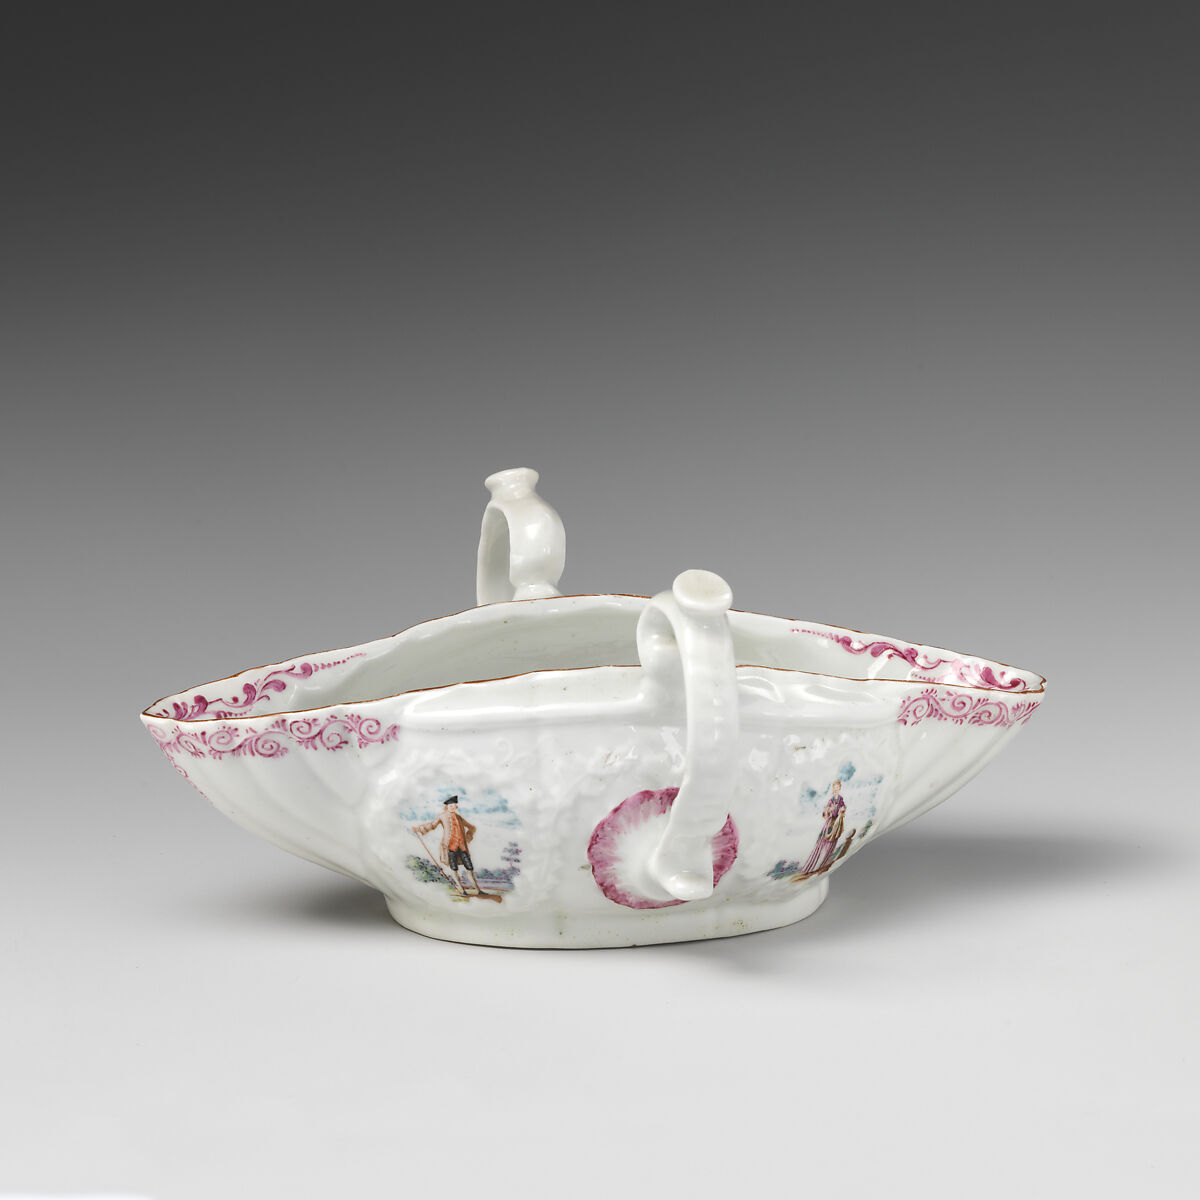 Sauceboat (one of a pair), Worcester factory (British, 1751–2008), Soft-paste porcelain, British, Worcester 